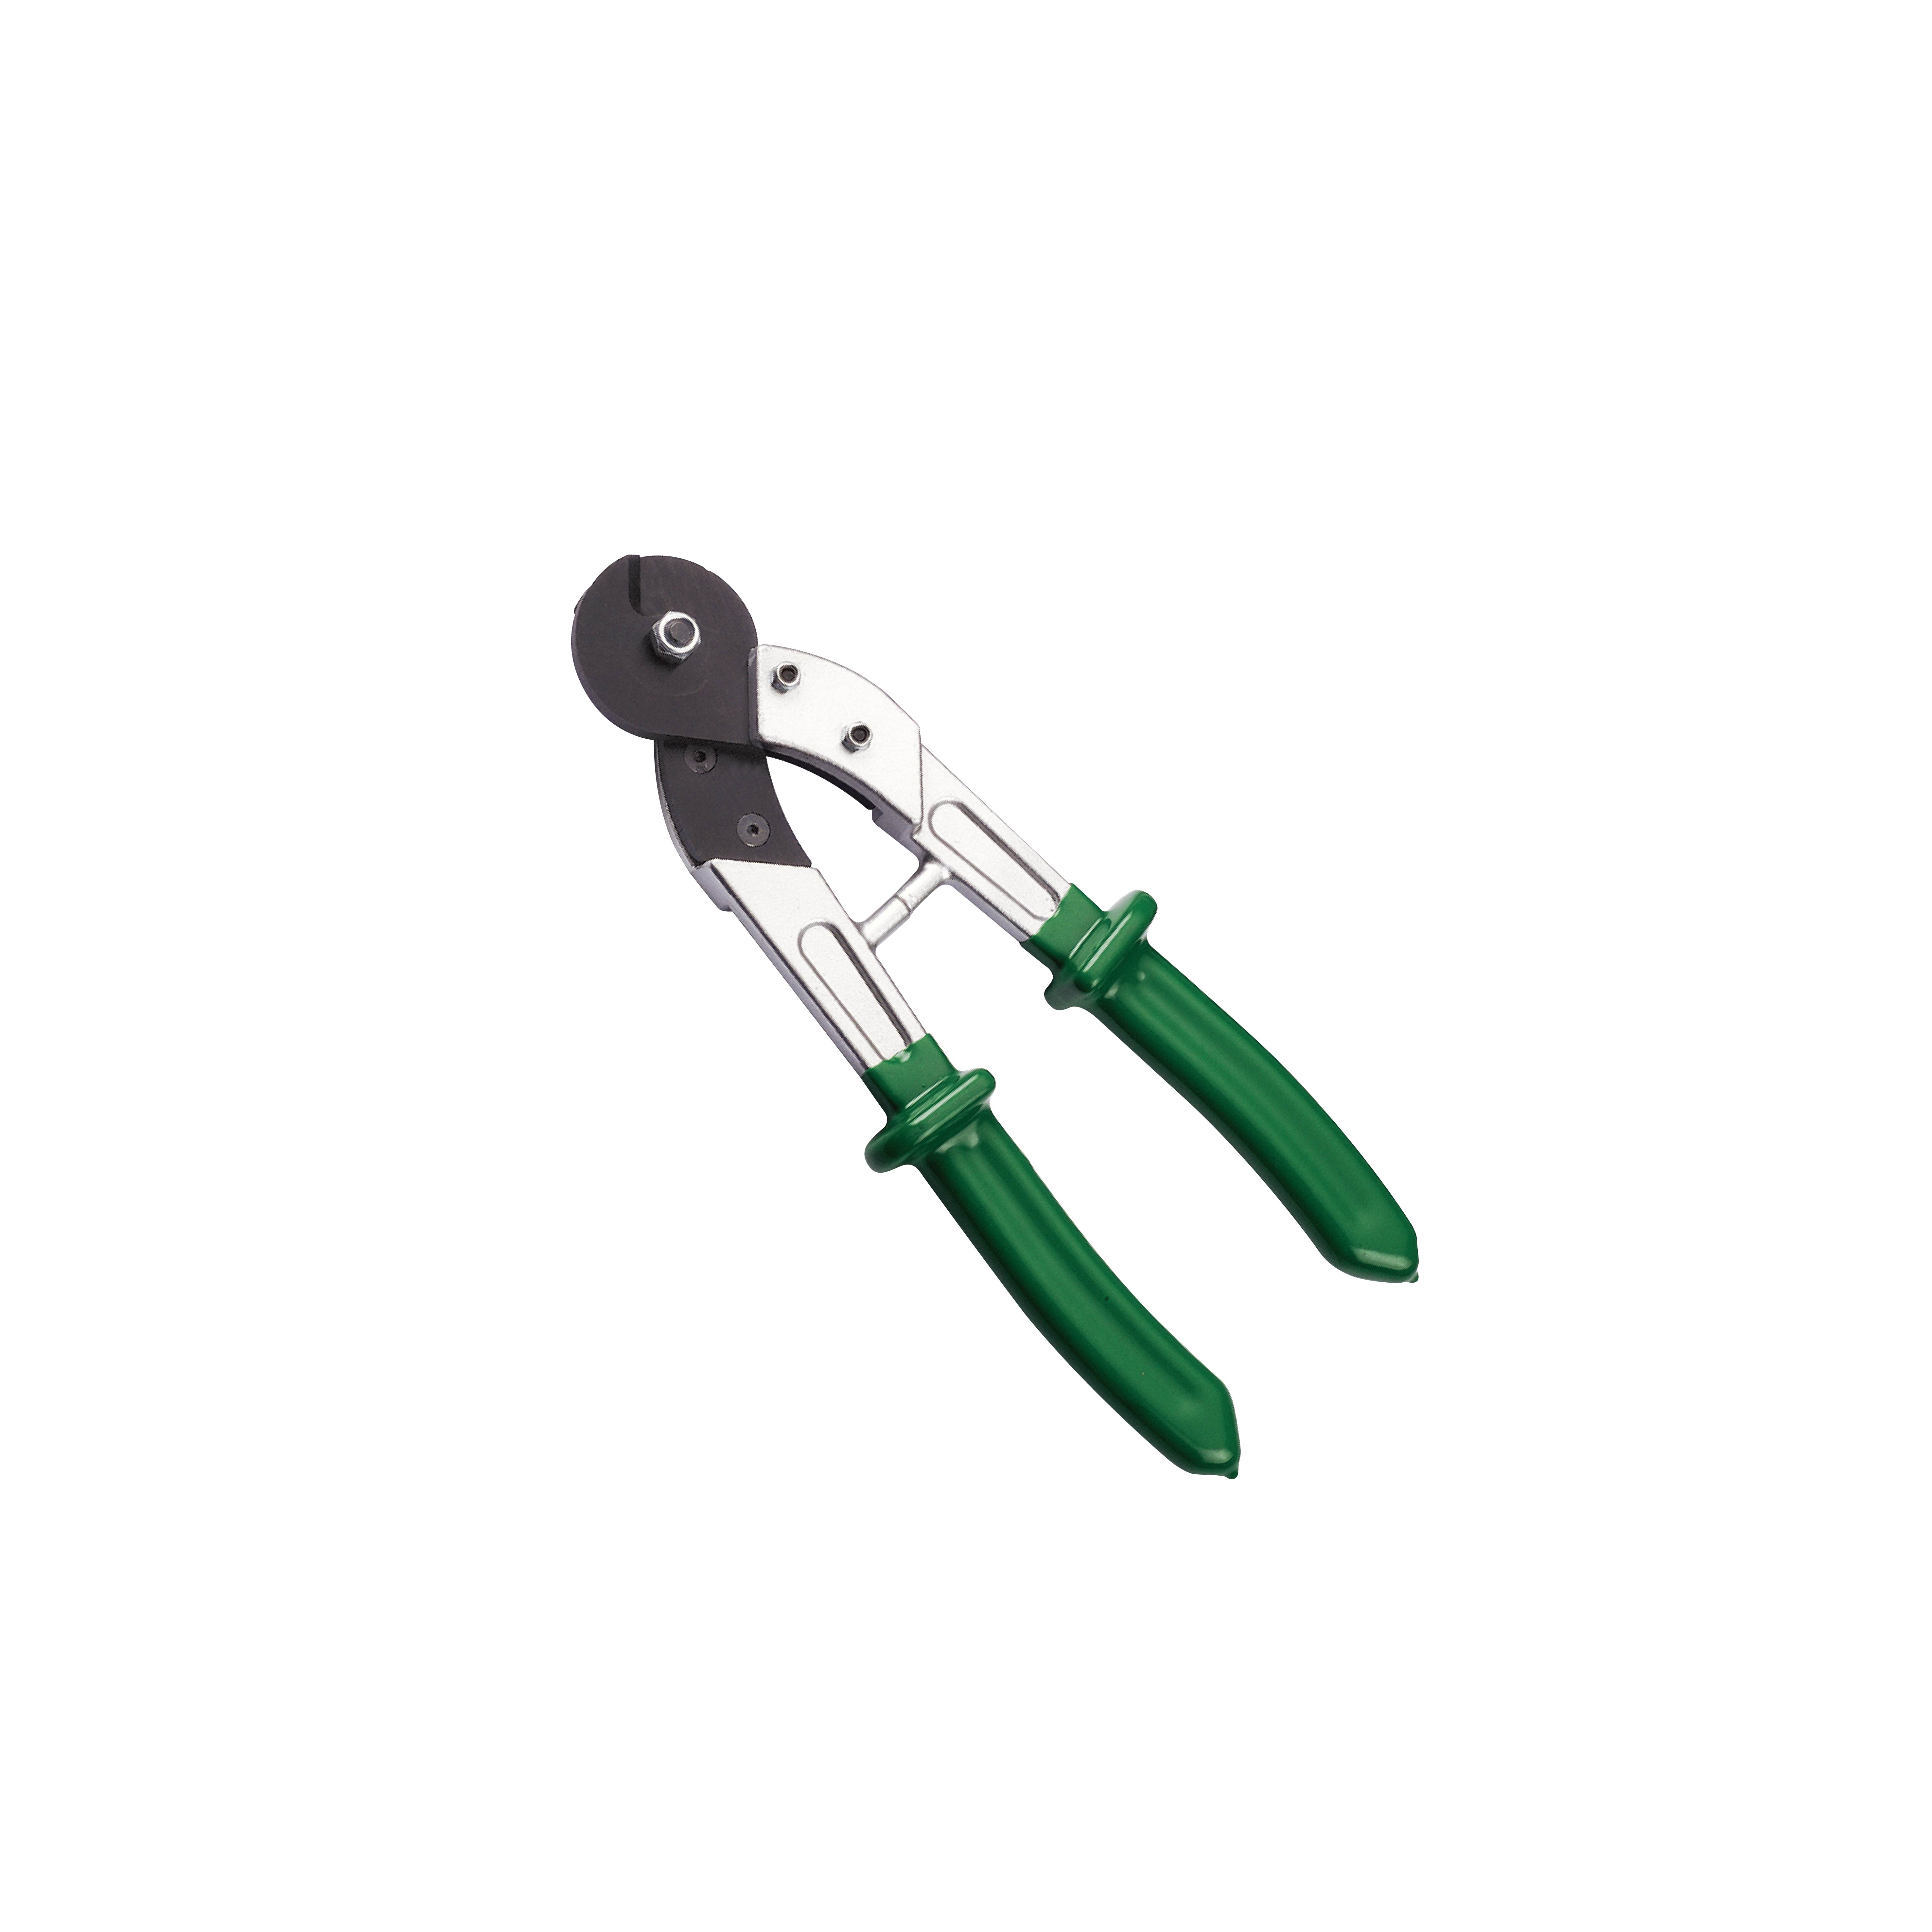 AC-110 HAND CABLE CUTTERS-AC-110